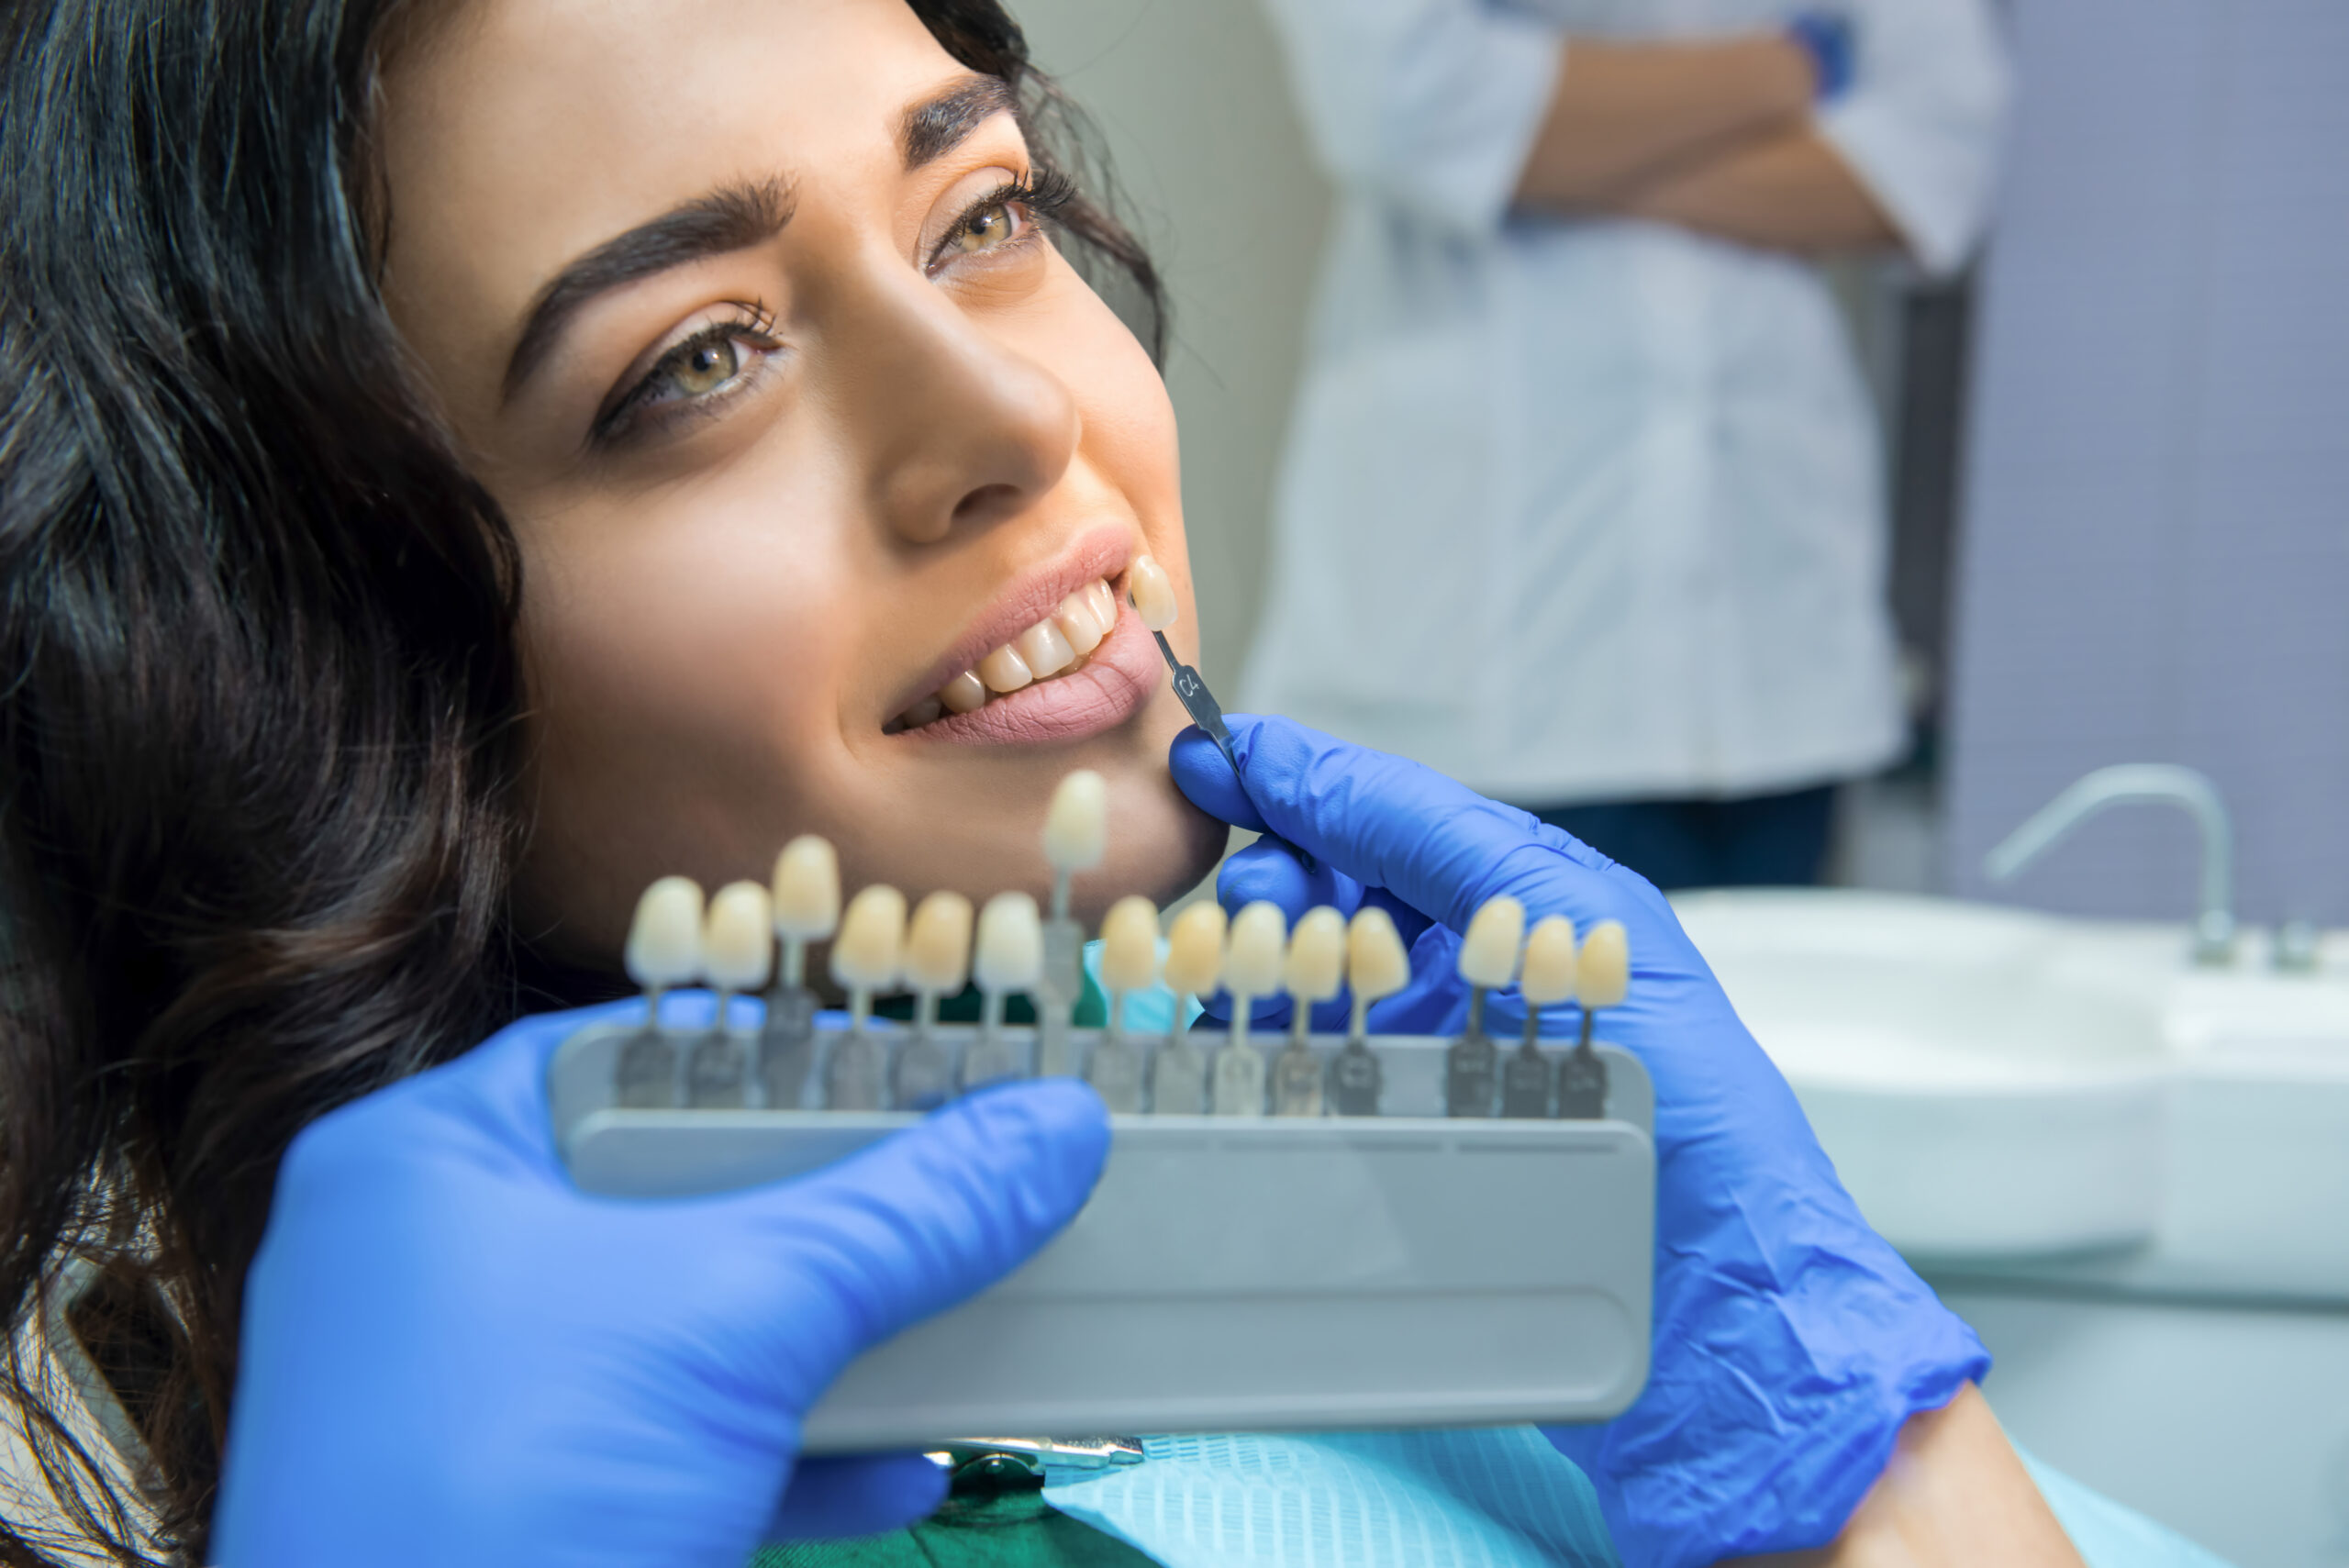 Dental crowns: Custom-fitted caps to restore damaged teeth, providing strength, protection, and a natural-looking appearane for enhanced oral health."